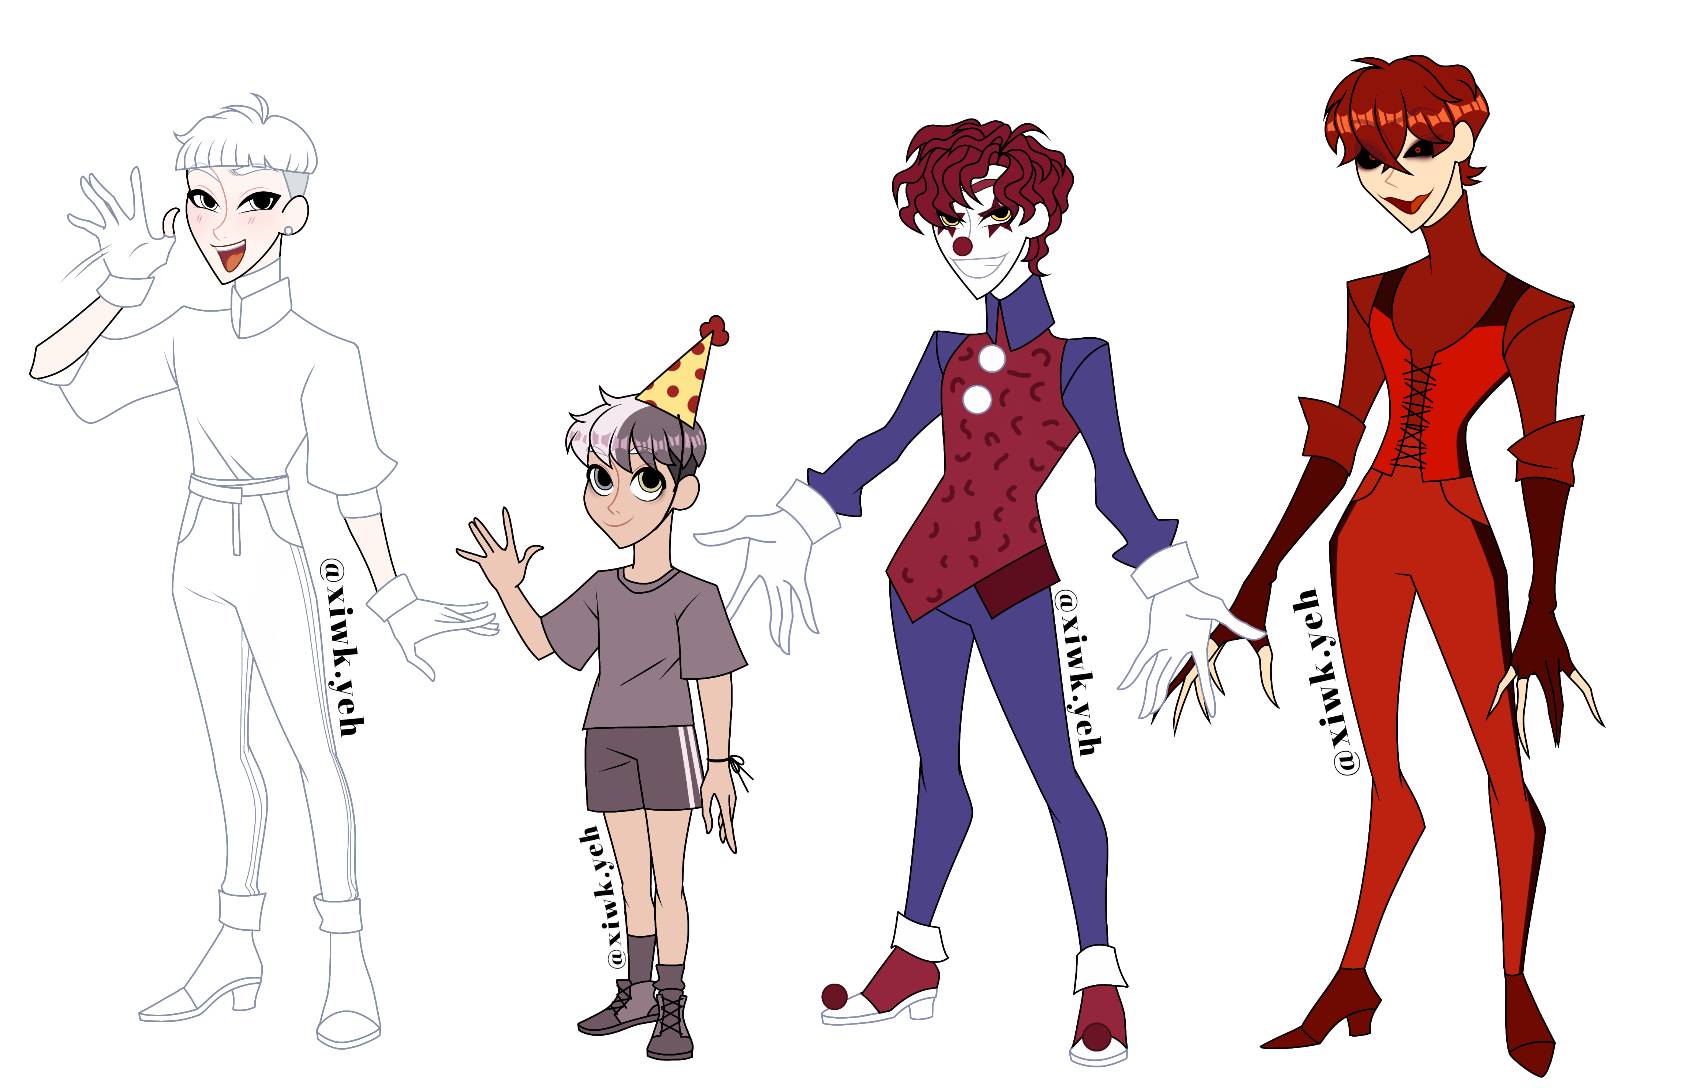 one night at flumpty's humanized by xiwkyeh on DeviantArt